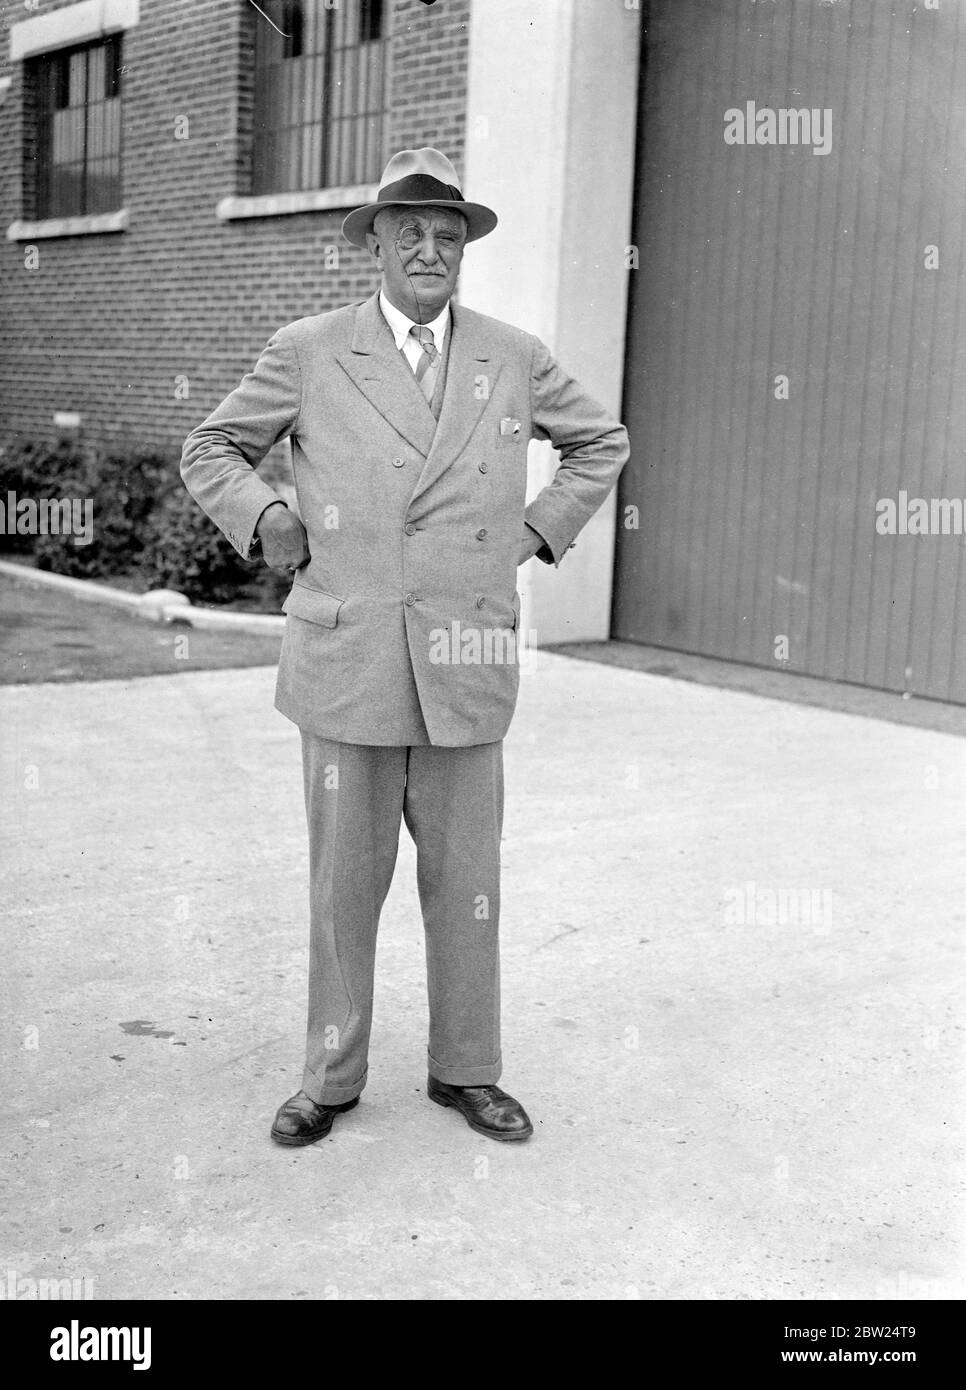 Count M Lippens the former governor general of the Belgian Congo, arrived at Southampton on the Imperial Airways flying boat Calpurnia. Mr Lippens, who is on his way to Paris, missed the train at Marseilles and rather than wait for the next one, he took the flying boat to Southampton intending to fly back across the Channel to Paris. Photo shows: The Count on his arrival at Southampton. 12 September 1938 Stock Photo